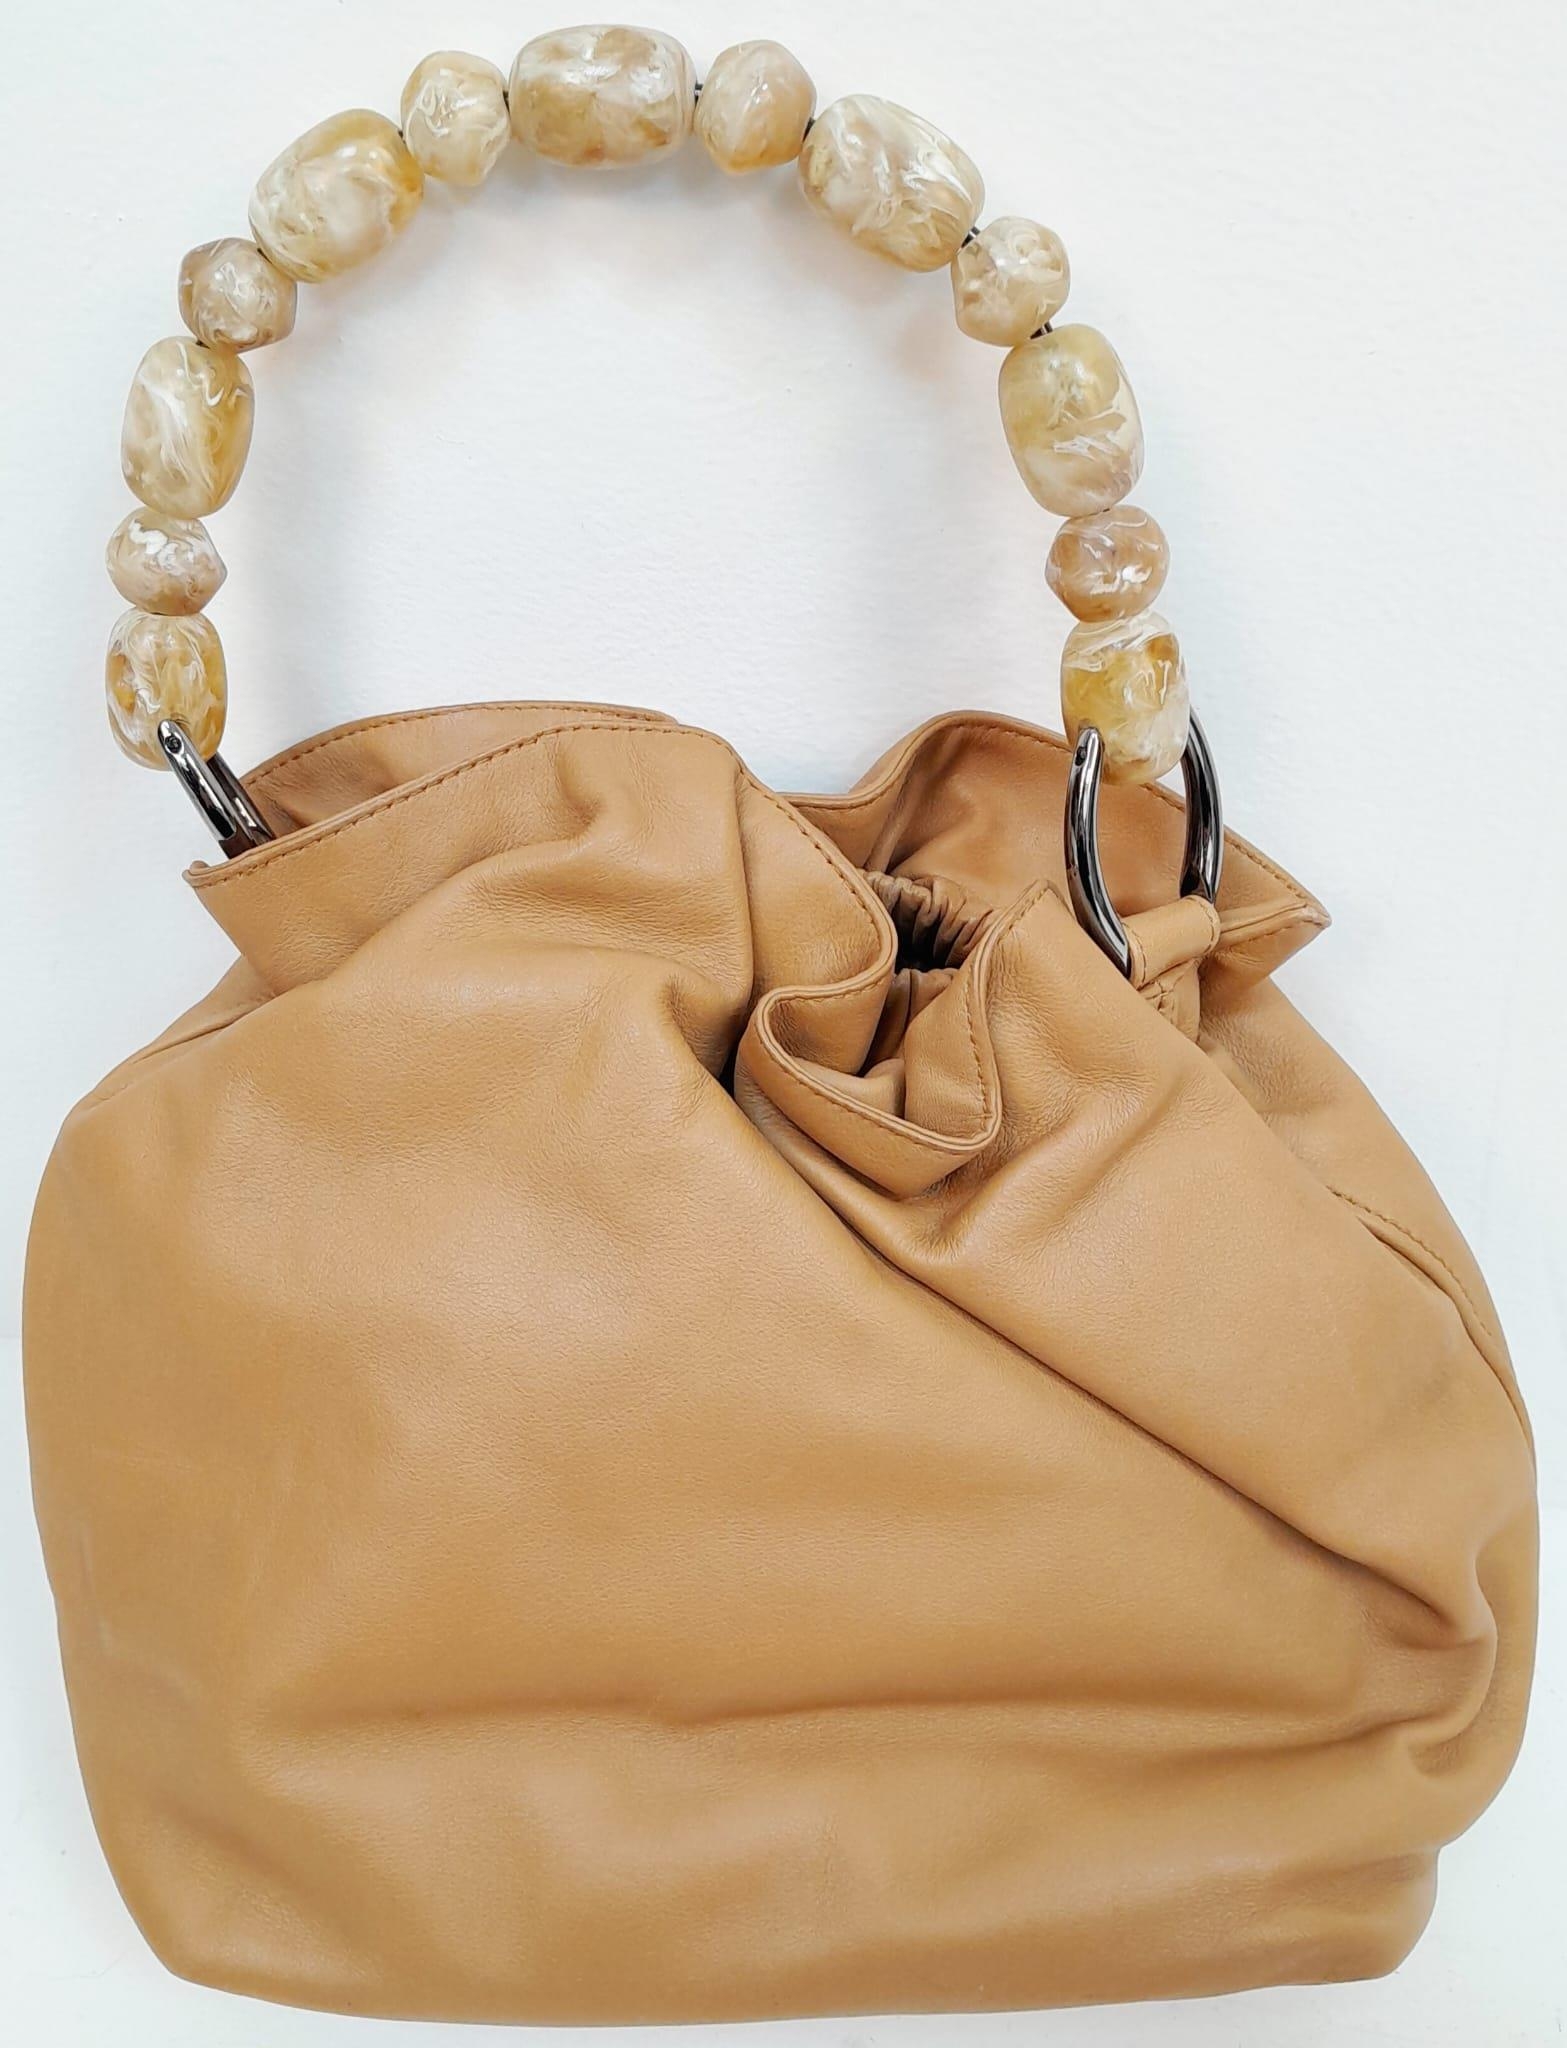 A Christian Dior Tan 'Maris' Hand Bag. Leather exterior with silver-toned hardware, beaded handle, - Image 2 of 6